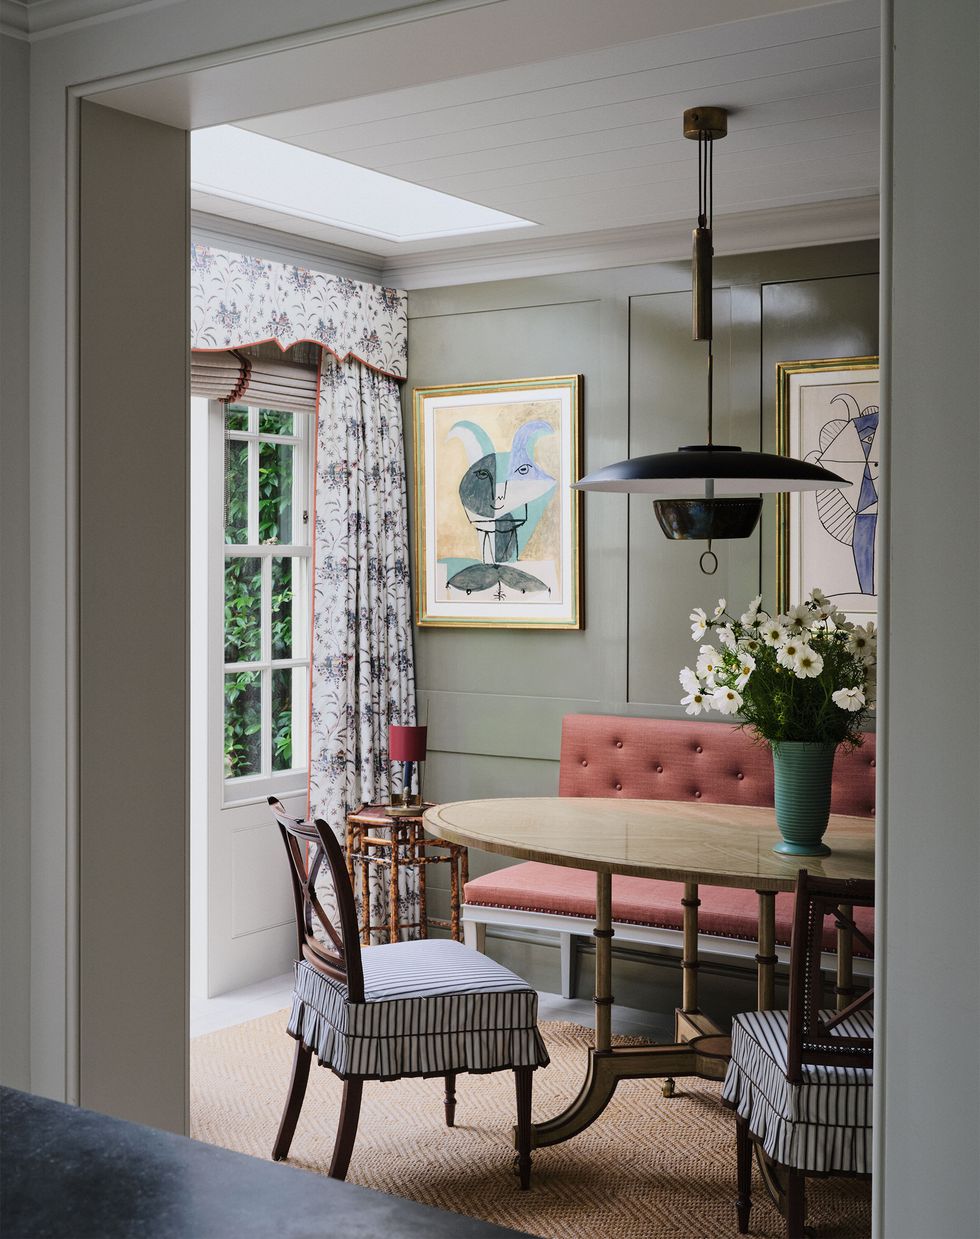 in a dining area are wood chairs with skirted fabric seats, an oval wood table, an upholstered banquette against a sage colored wall, a hexagonal side table, floral curtains, and pochoir artworks